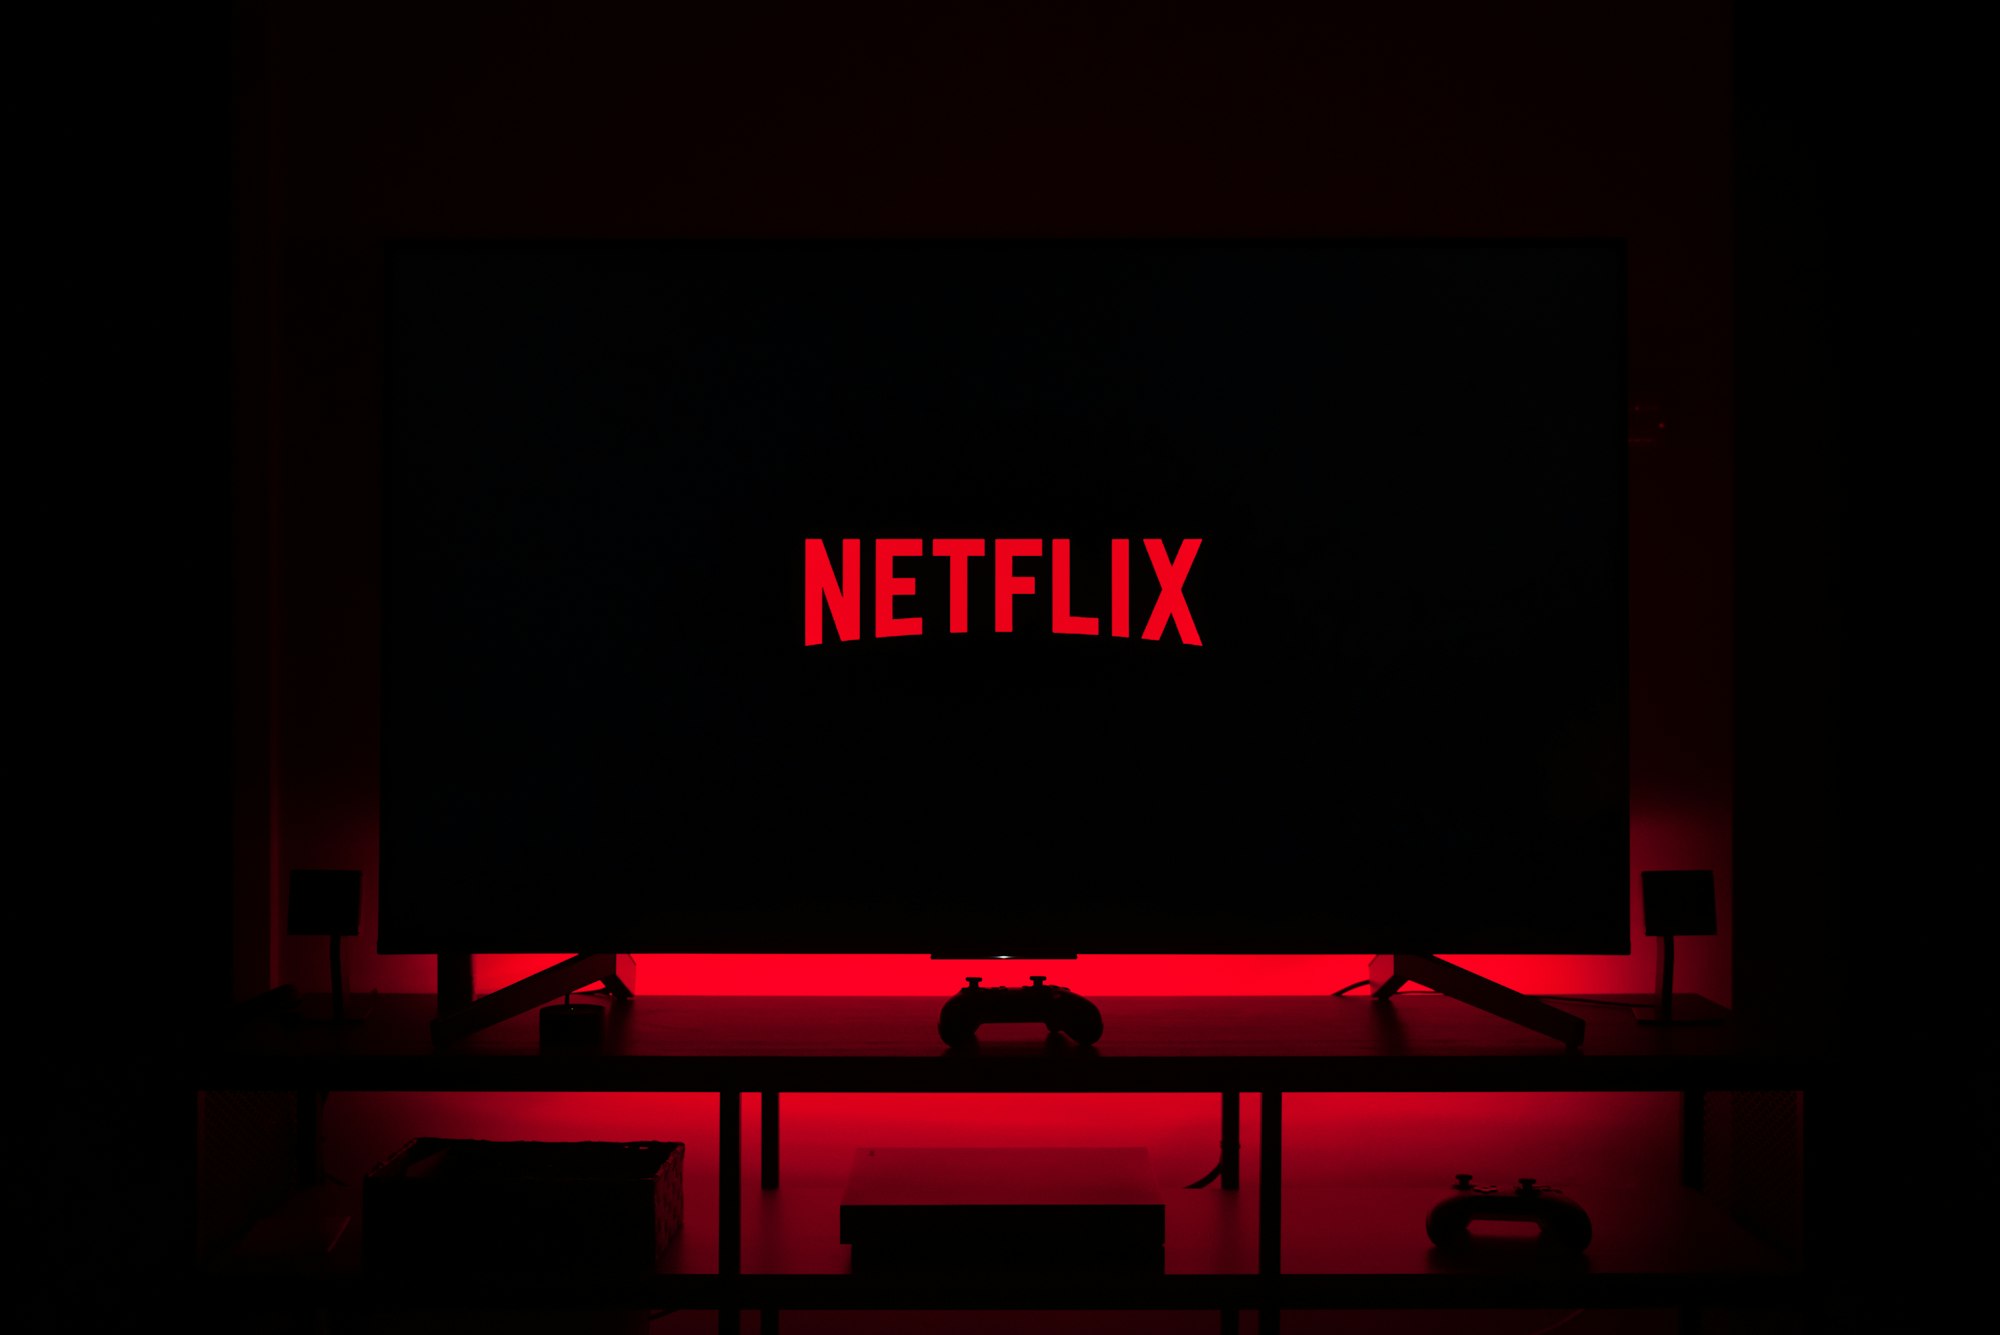 Private Internet Access for Netflix: Does It Work?